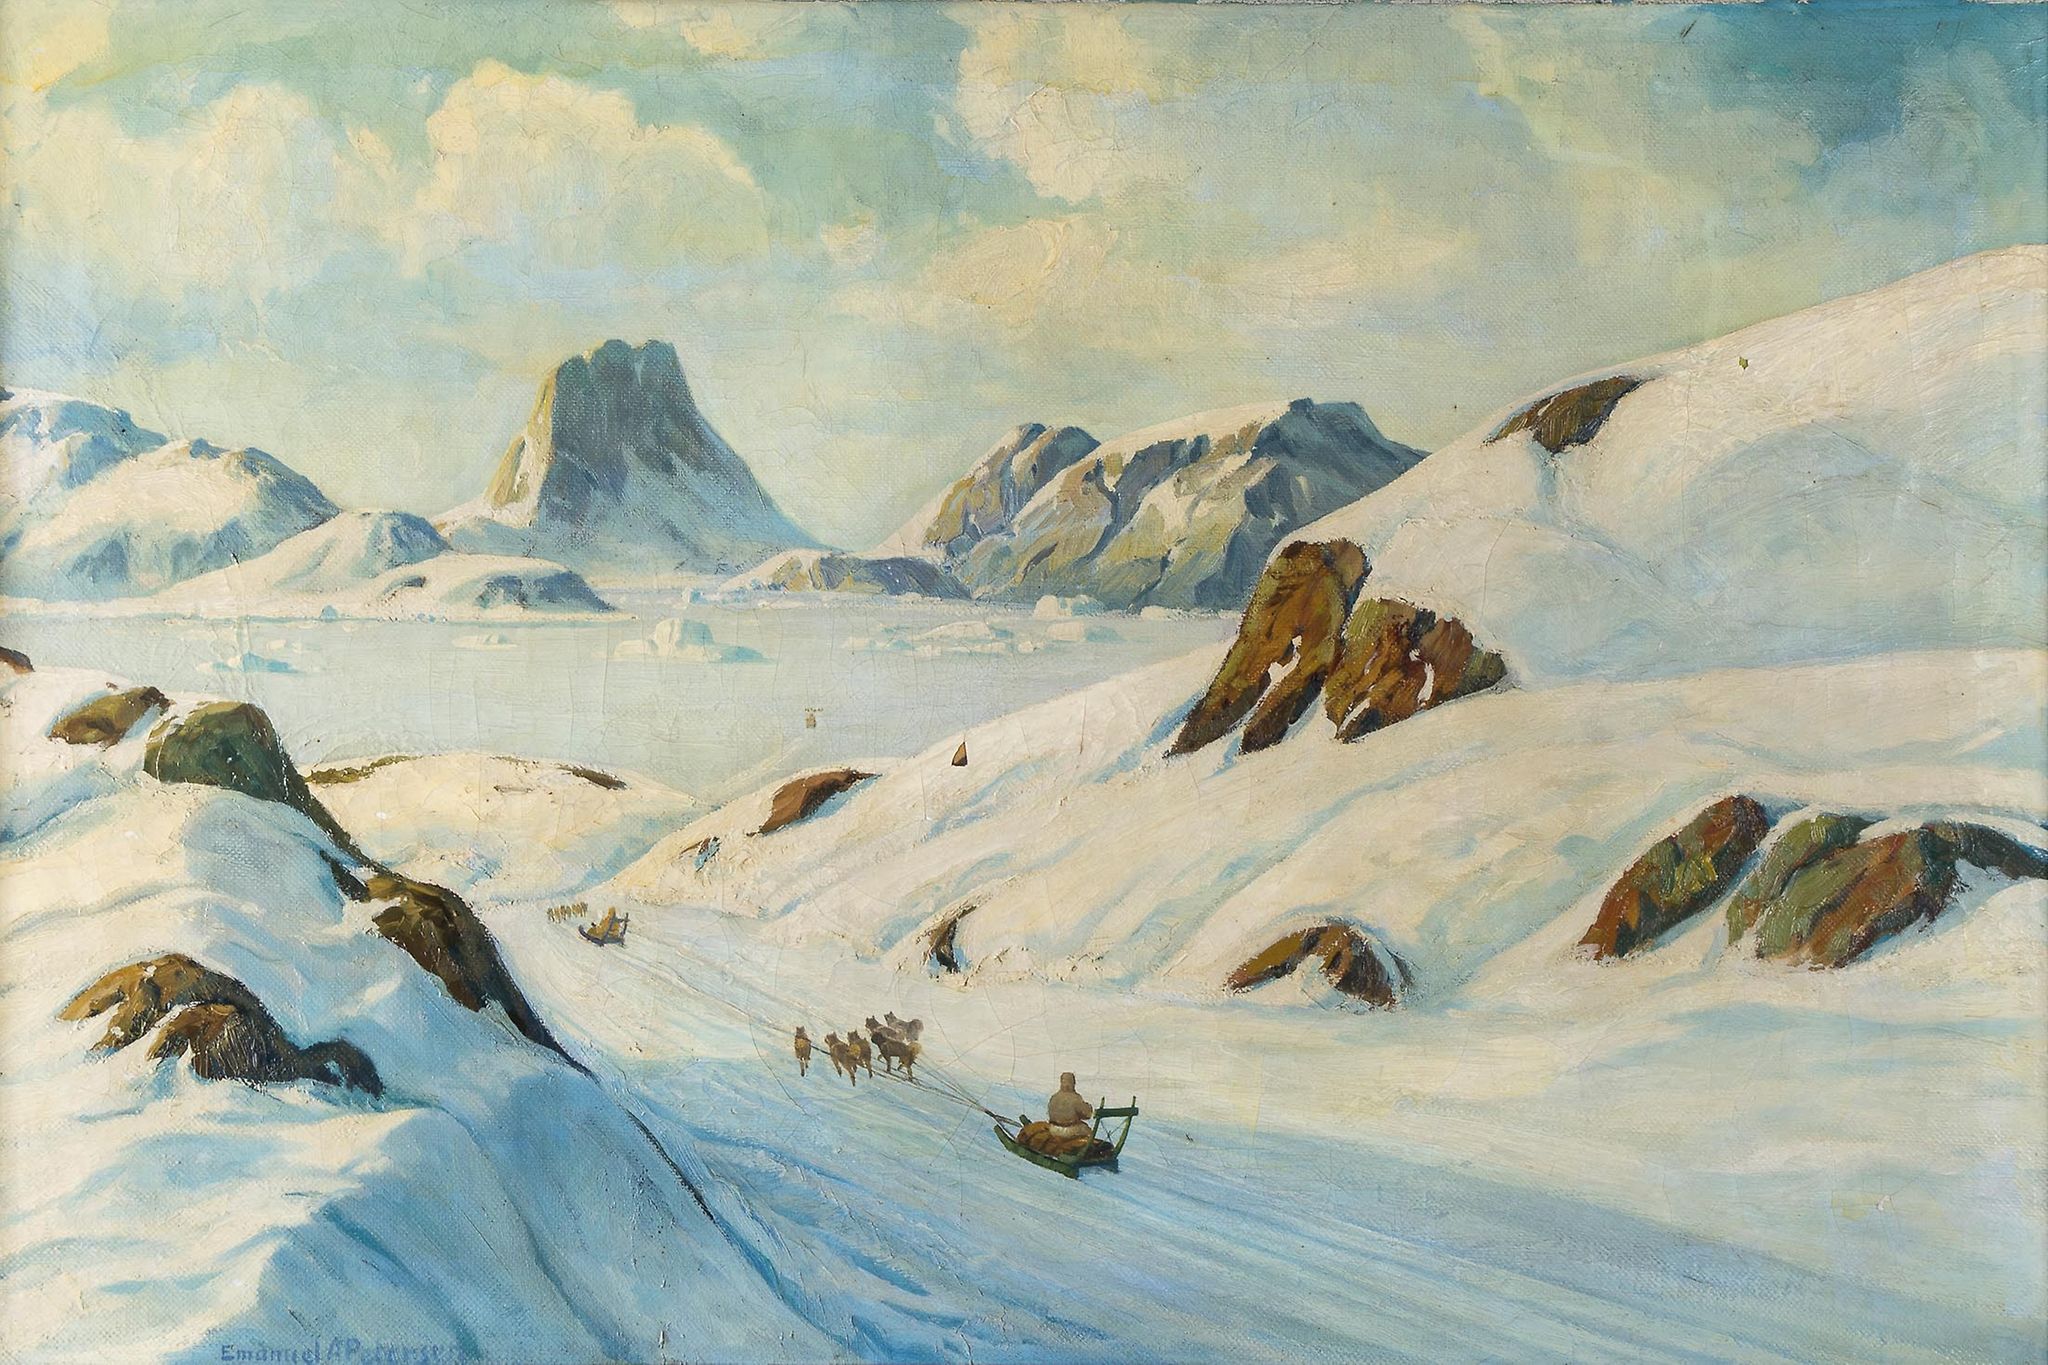 Petersen (Emanuel A.) - Dog sledding in Greenland, oil on canvas, 600 x 900mm., signed lower left, a